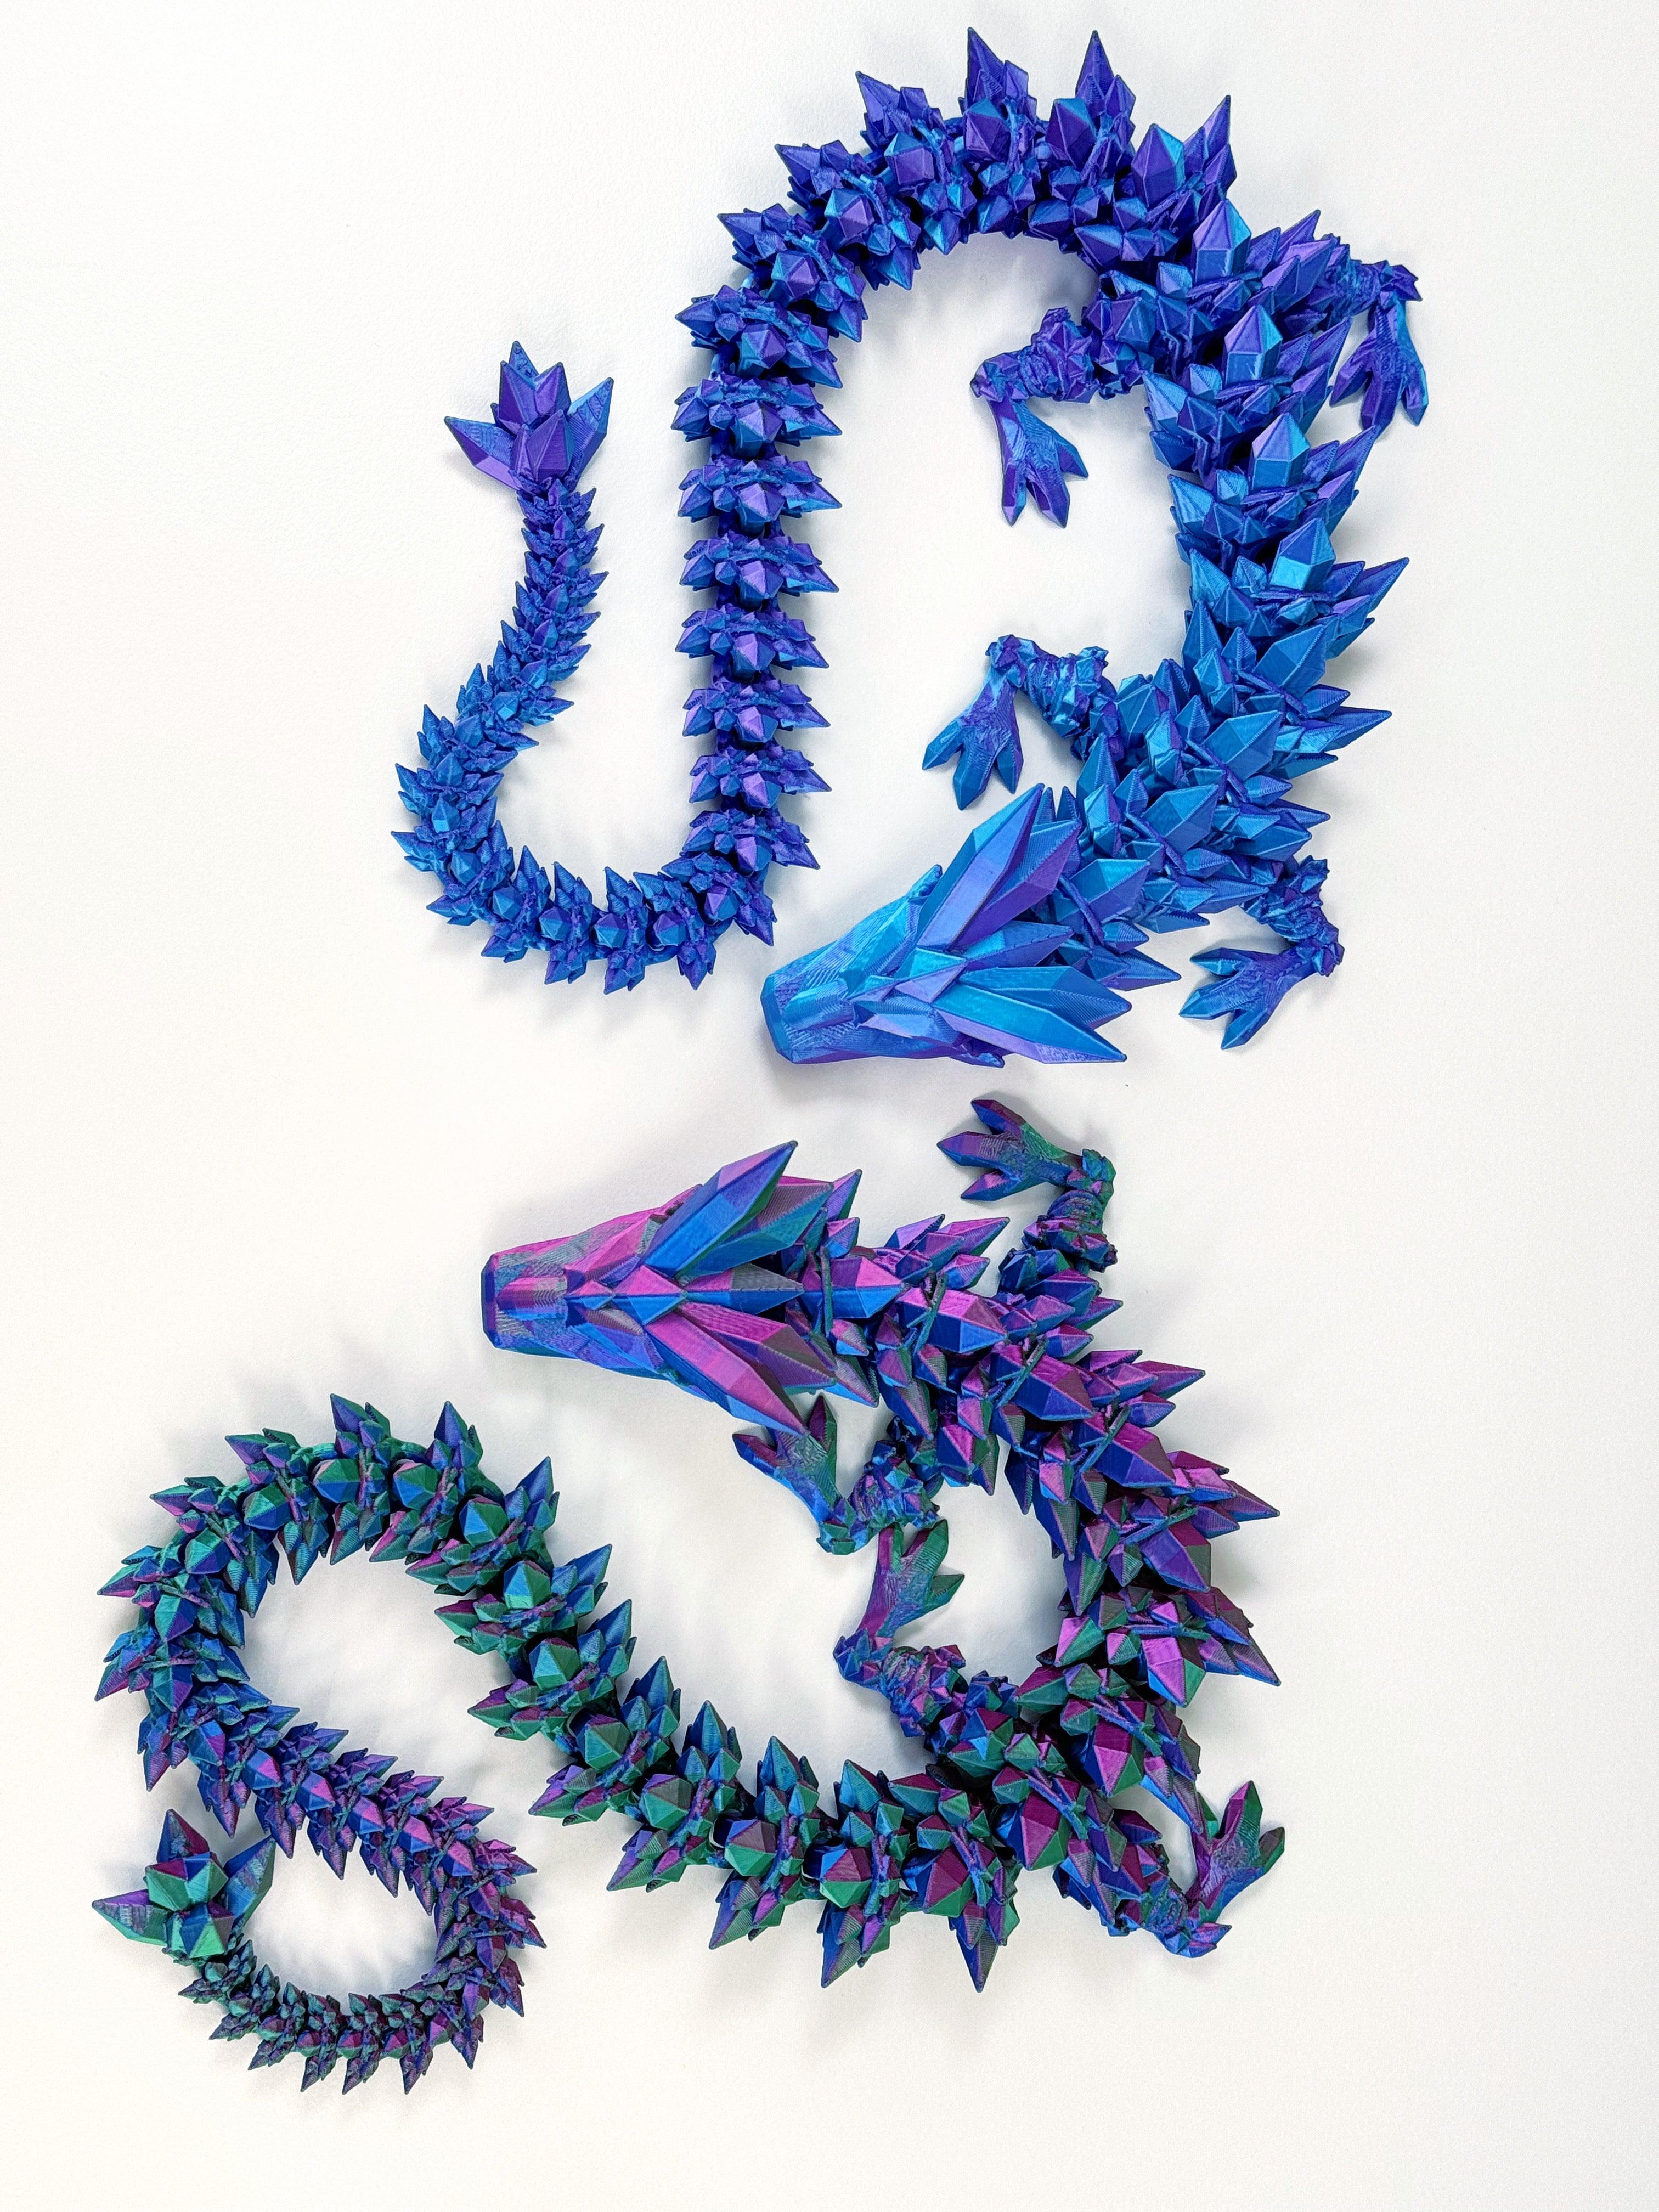 PICK-YOUR-OWN: CRYSTAL DRAGONS - valentines vibes - The Mineral Maven